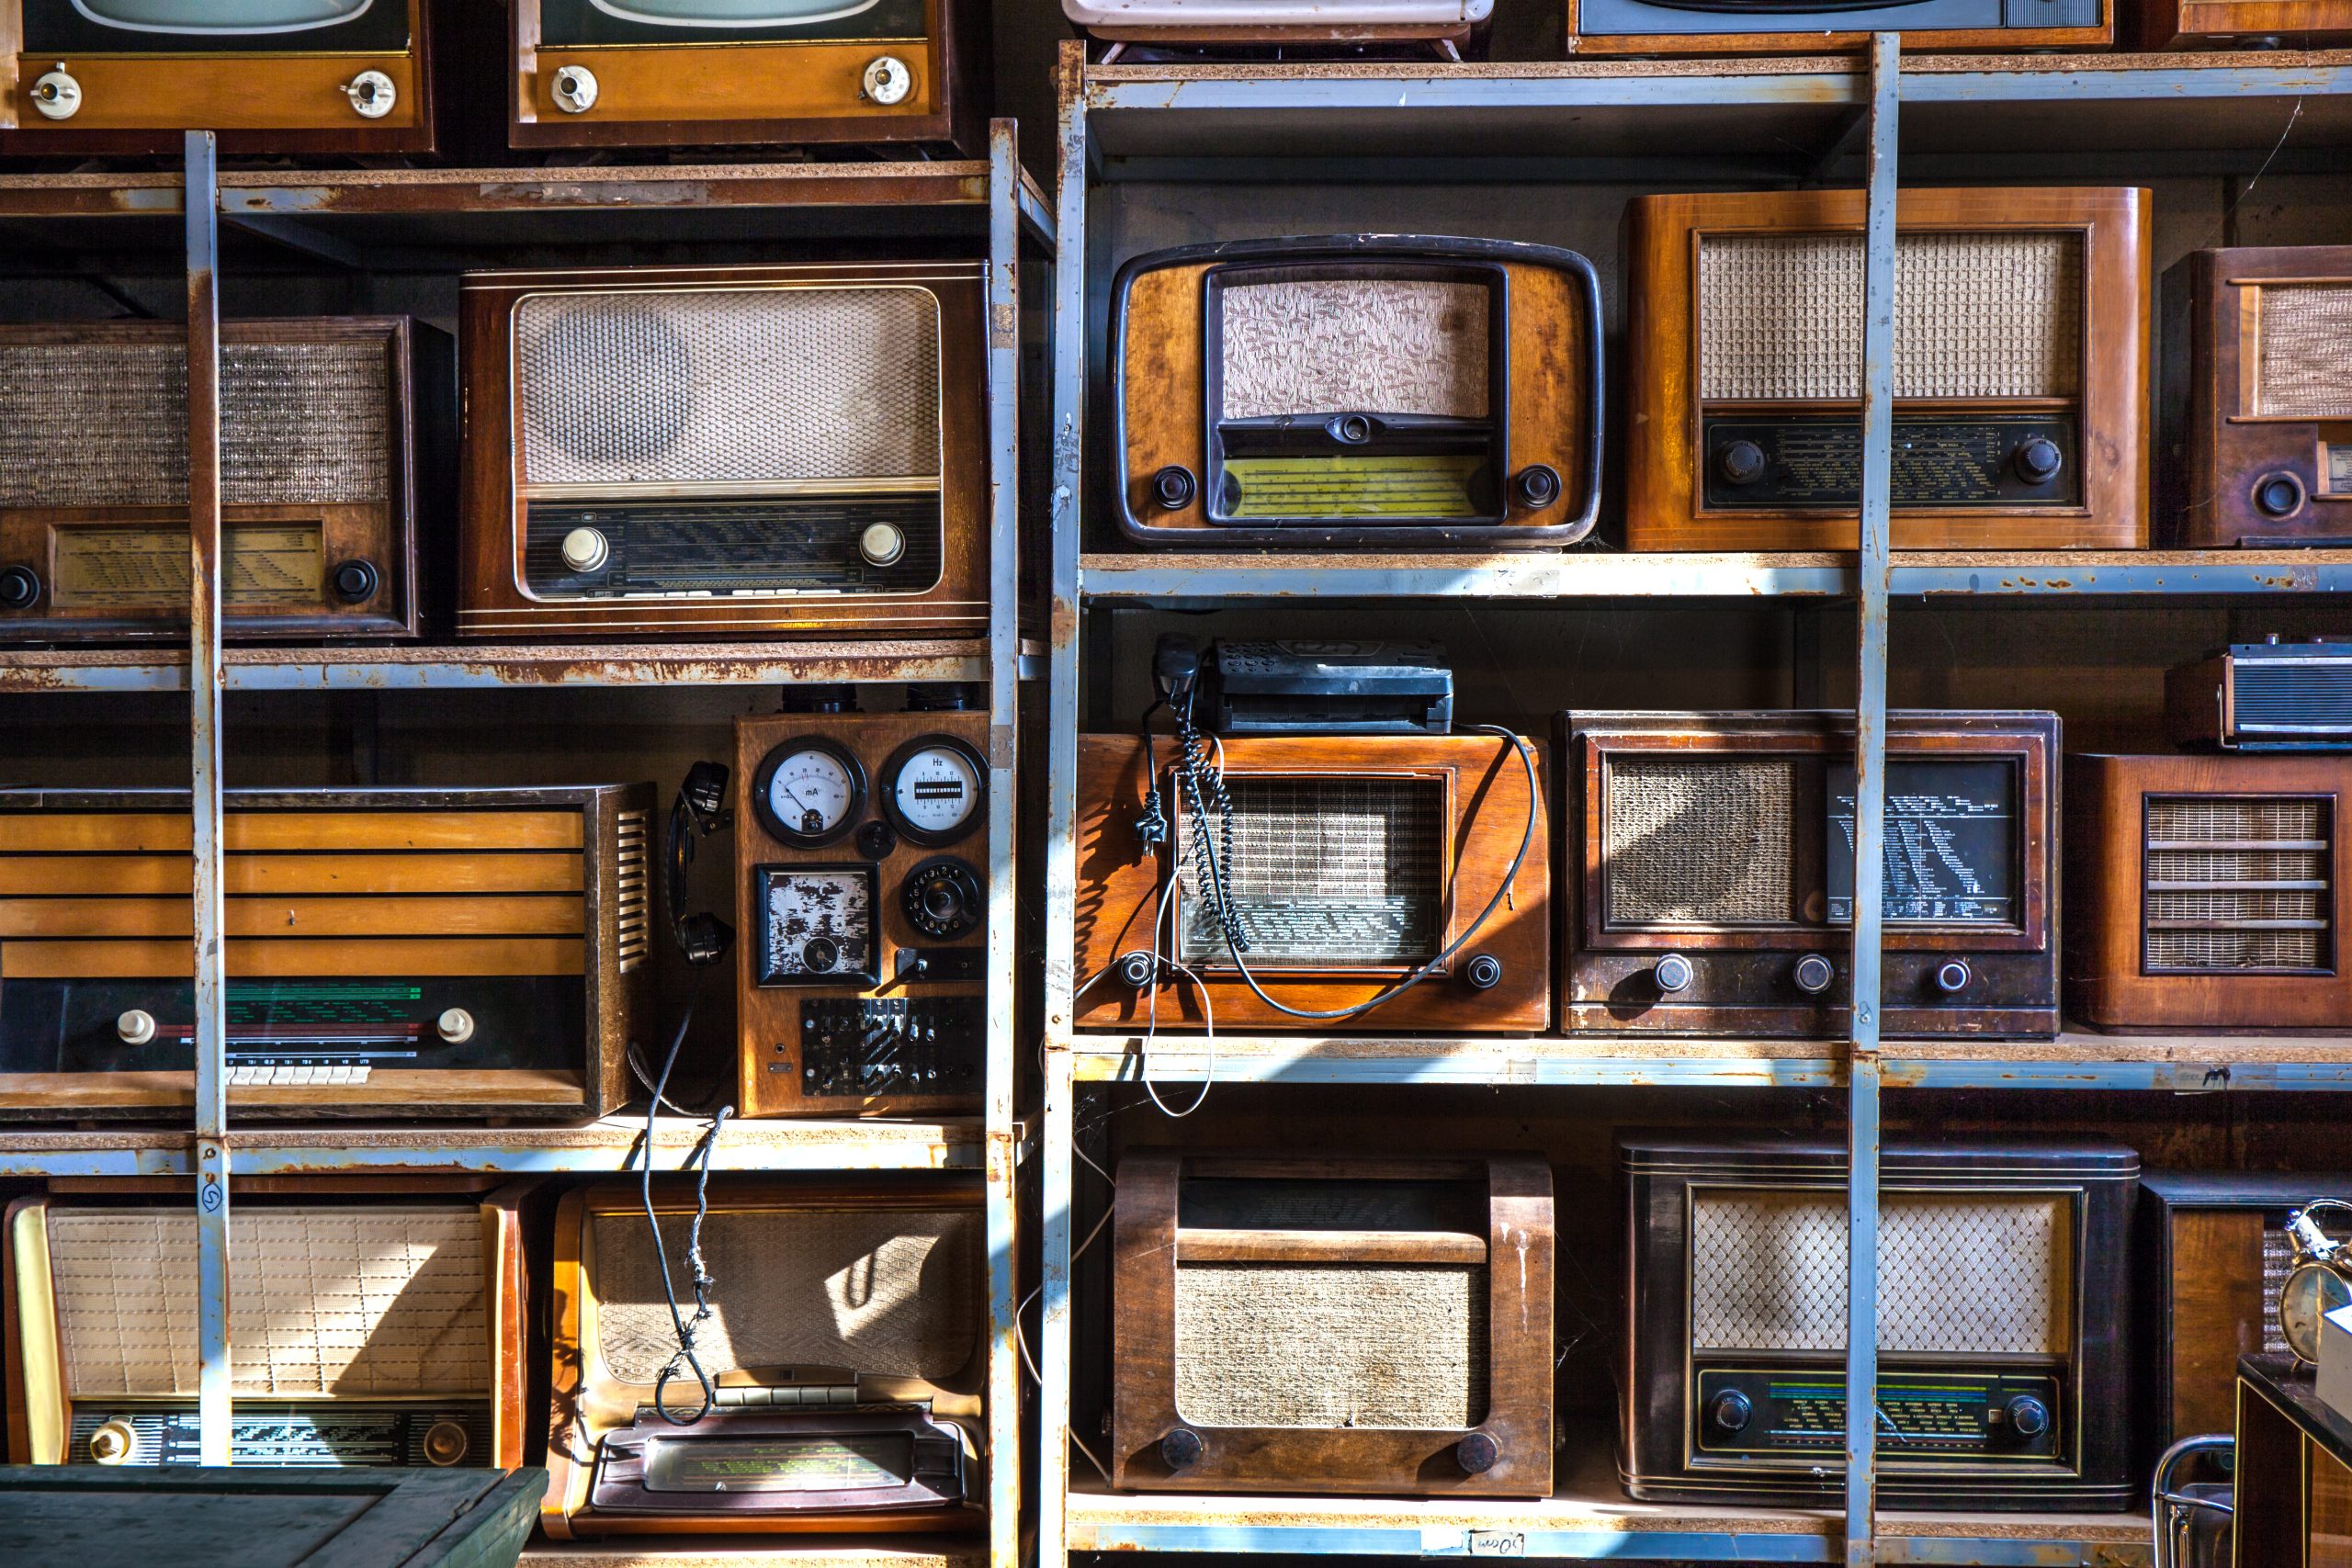 Dust shelves in a store holding old radio equipment